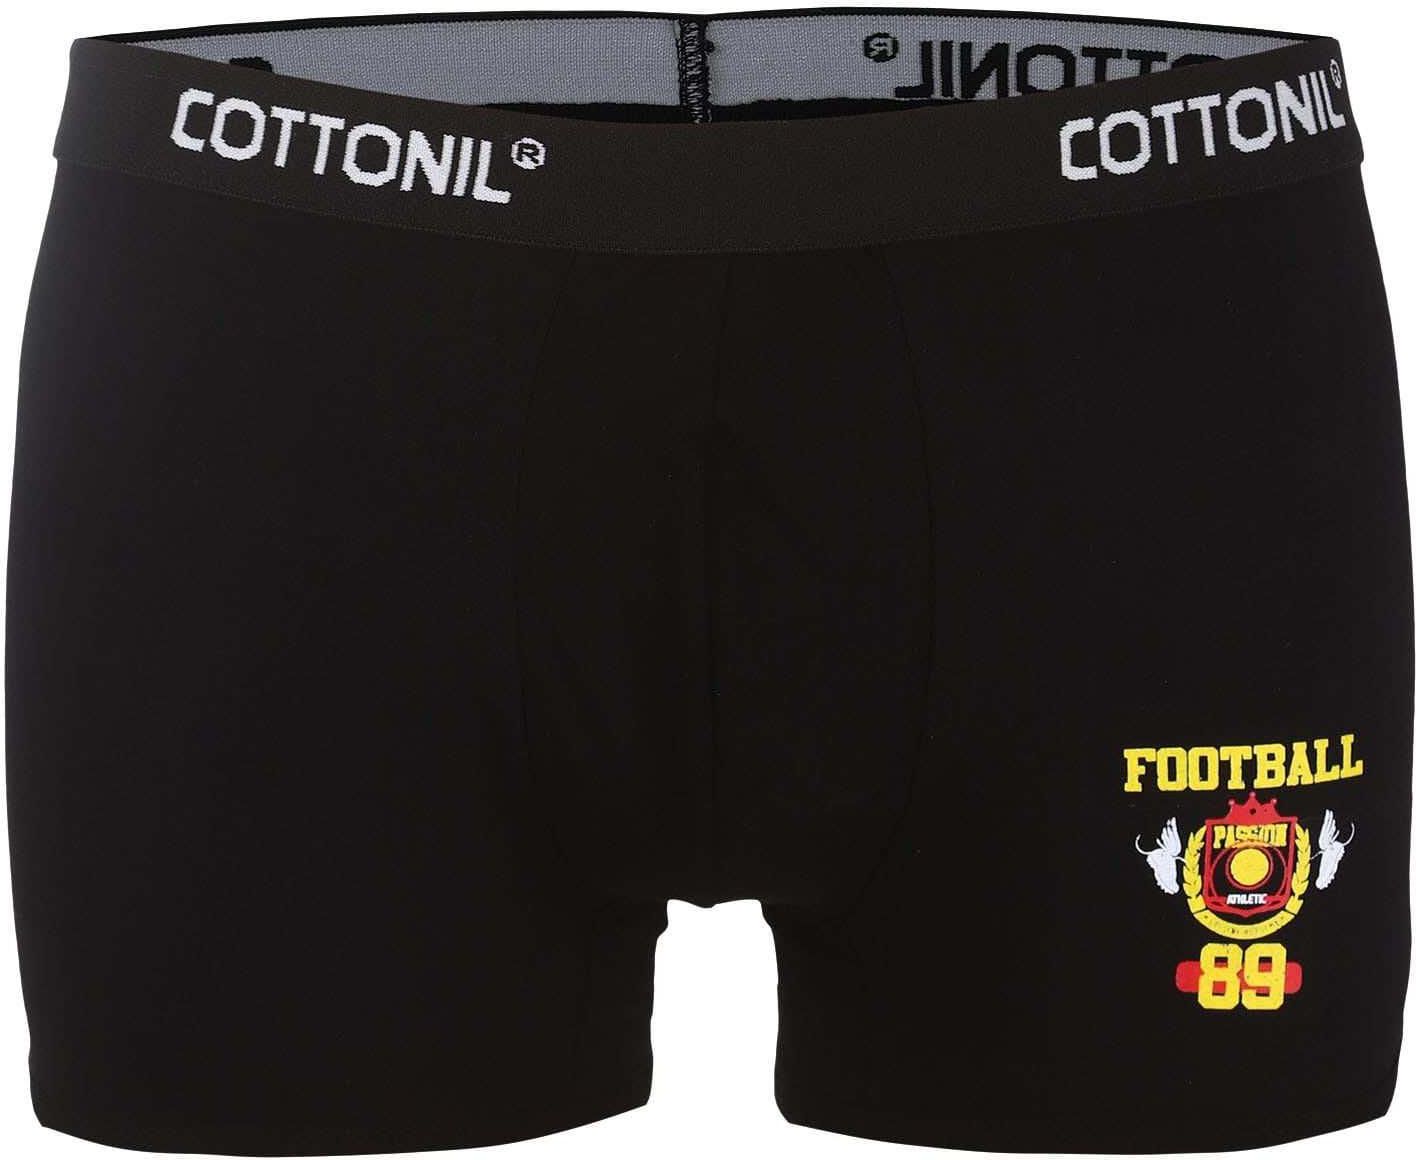 Get Cottonil Relax Cotton Boxer For Men, Size 5 - Black with best offers | Raneen.com